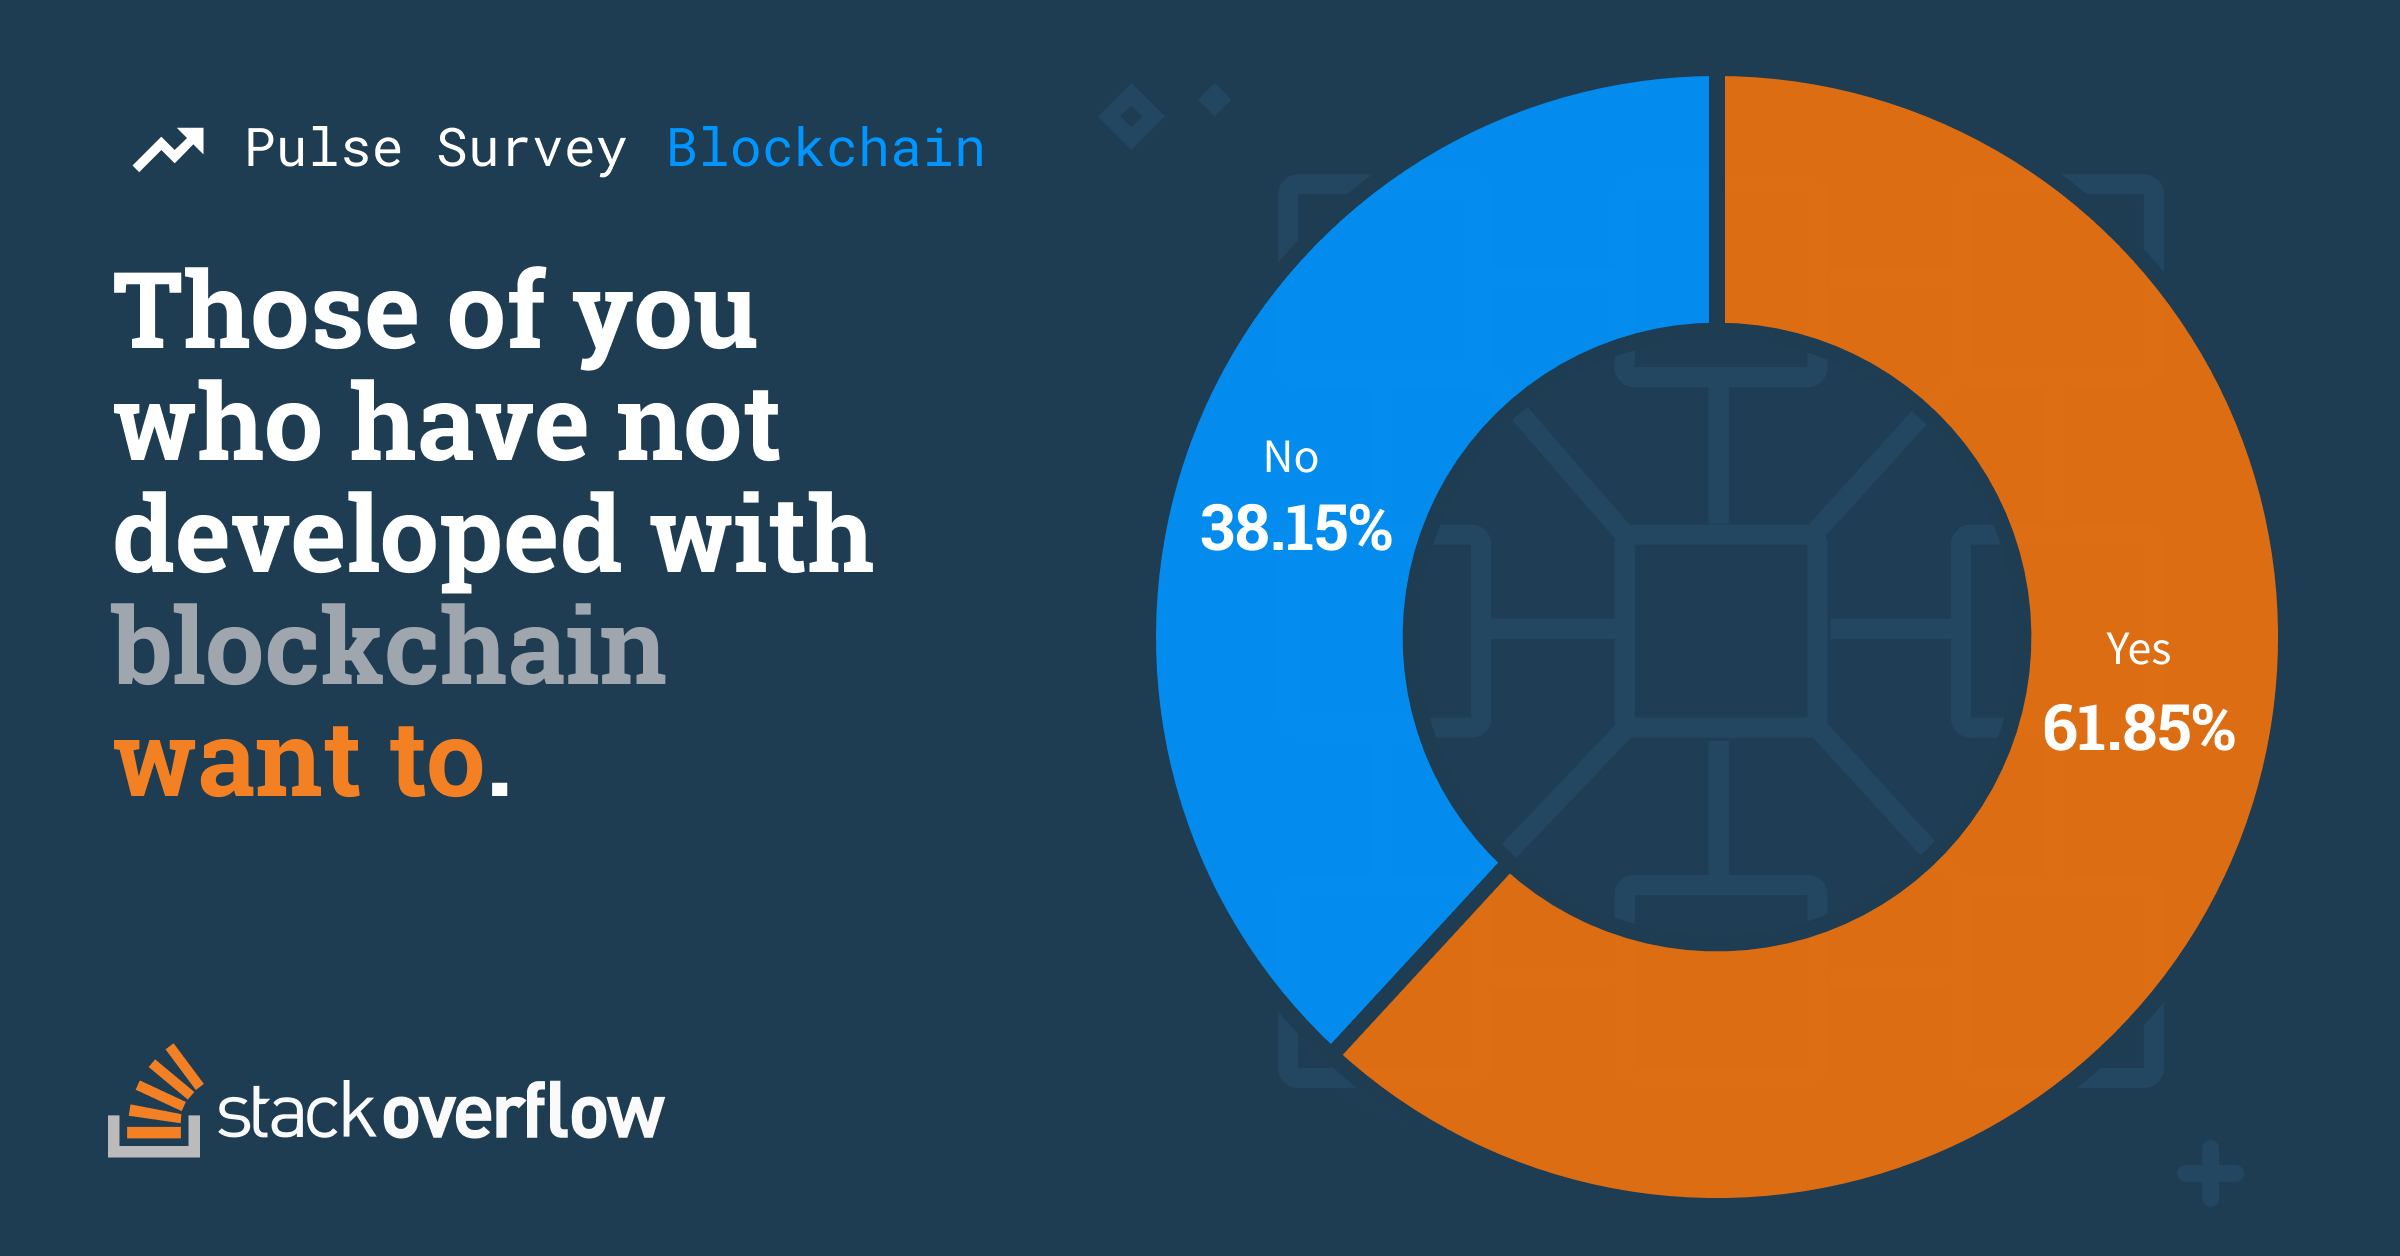 Results from the Blockchain survey: 61.85% of those of you who have not developed with blockchain want to.